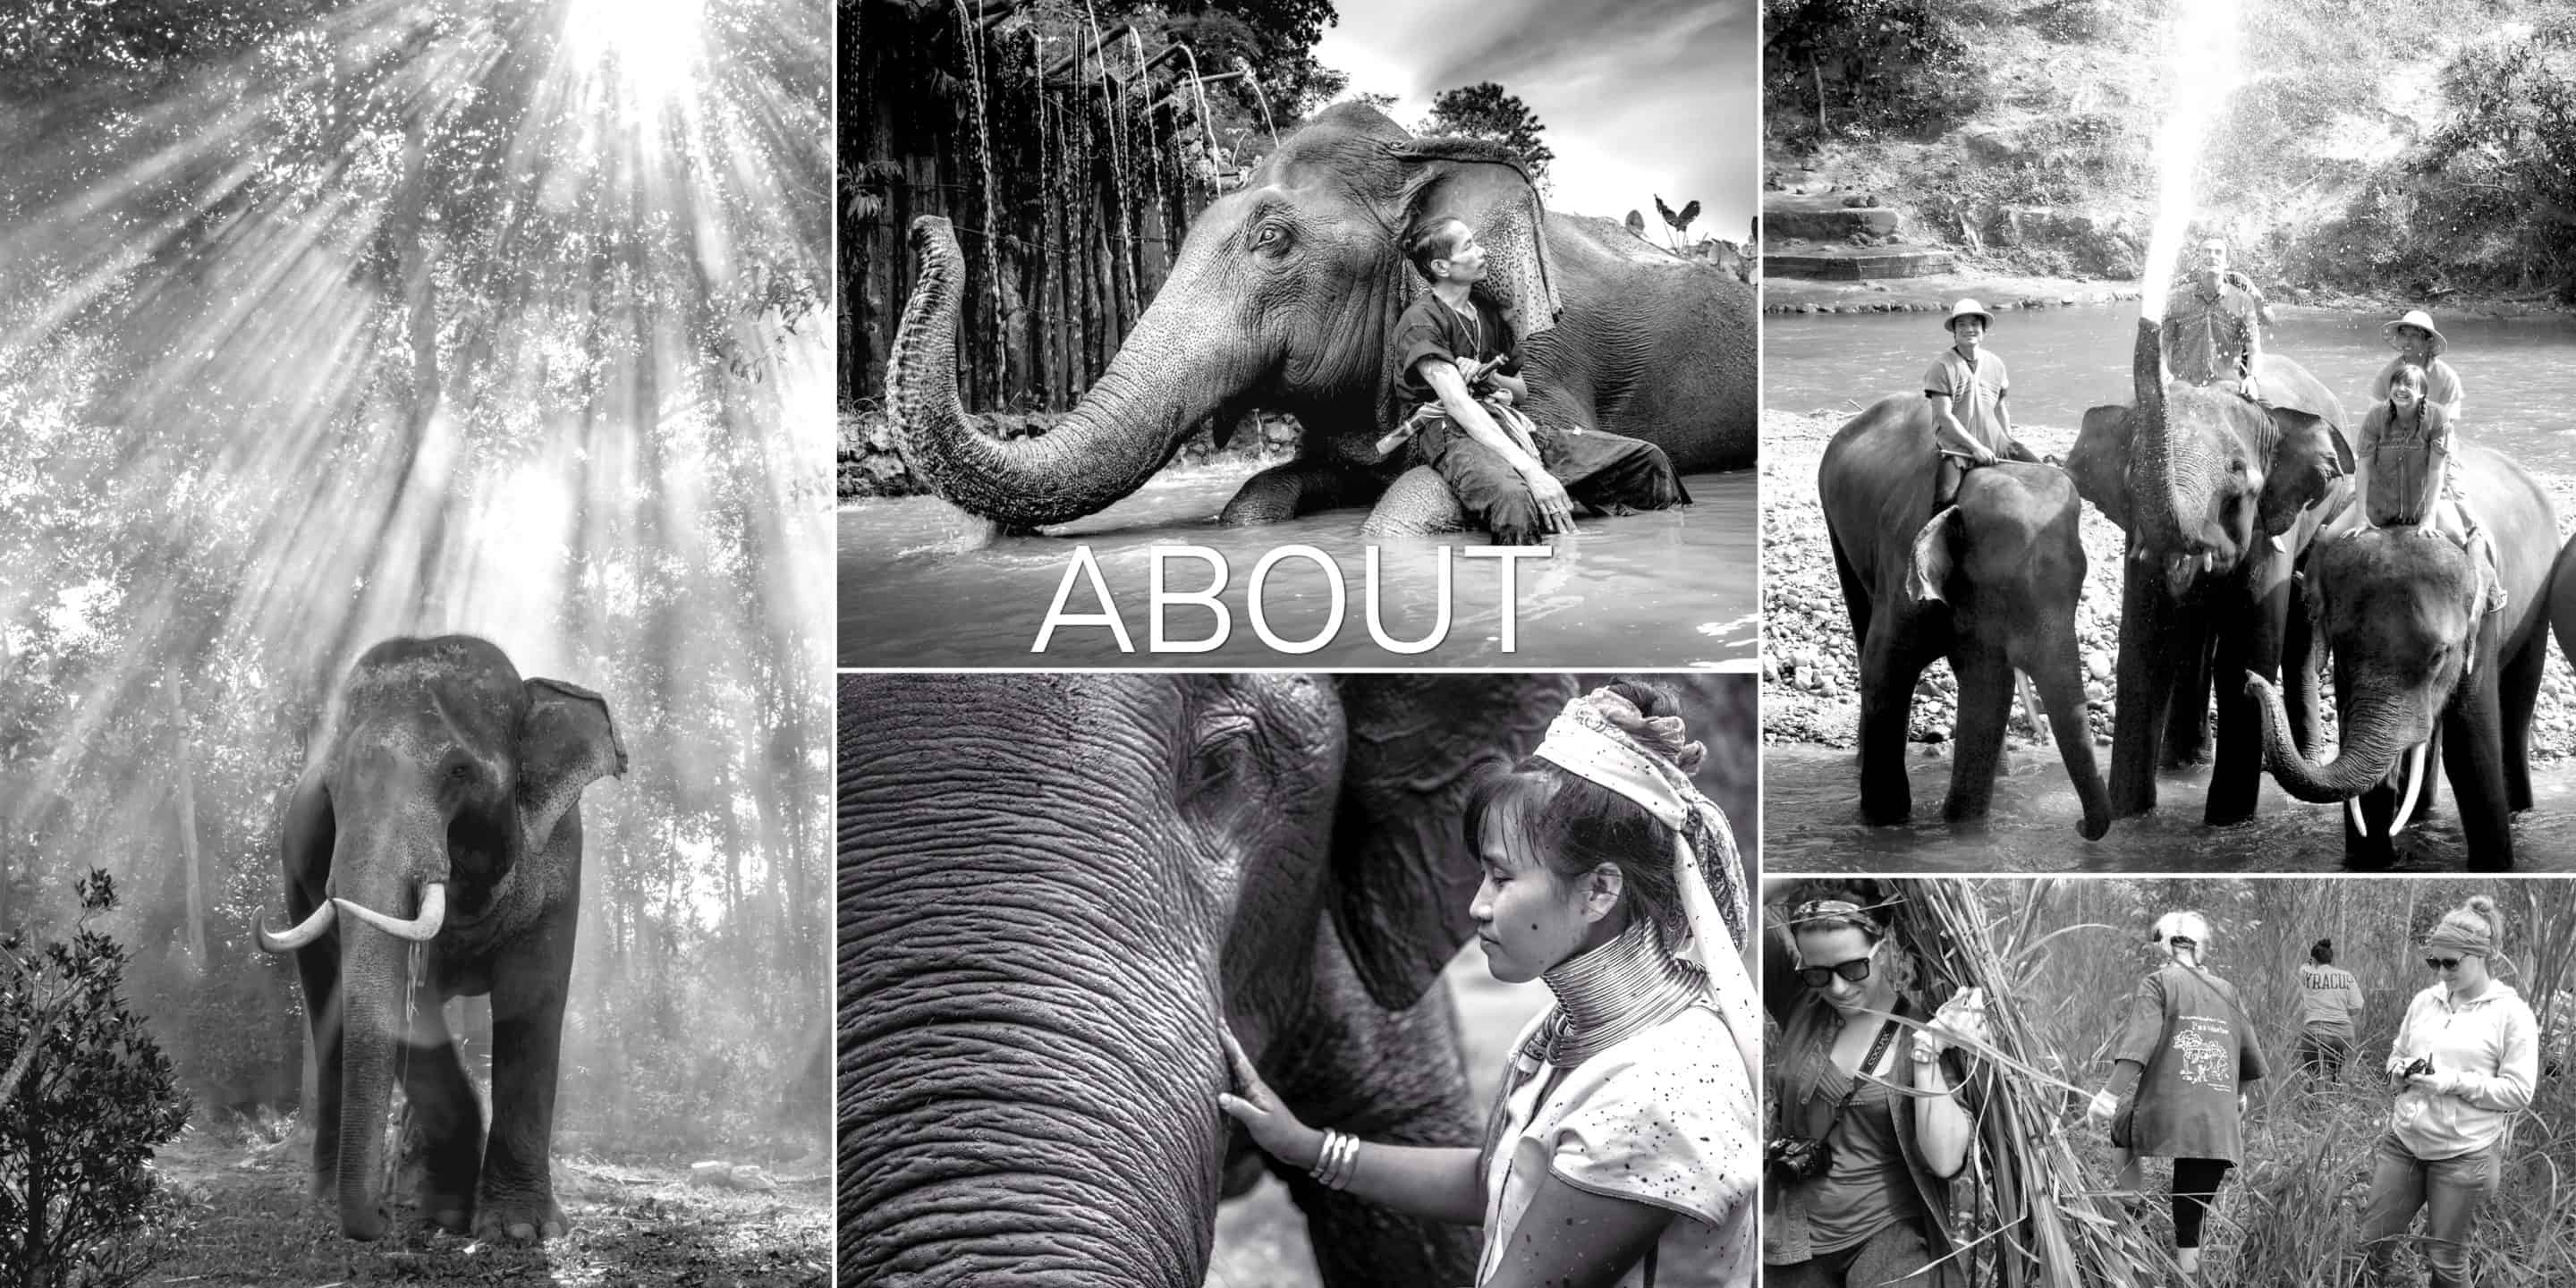 Ethical elephant adventure in the wilderness at Elephant EcoValley near Chiang Mai.